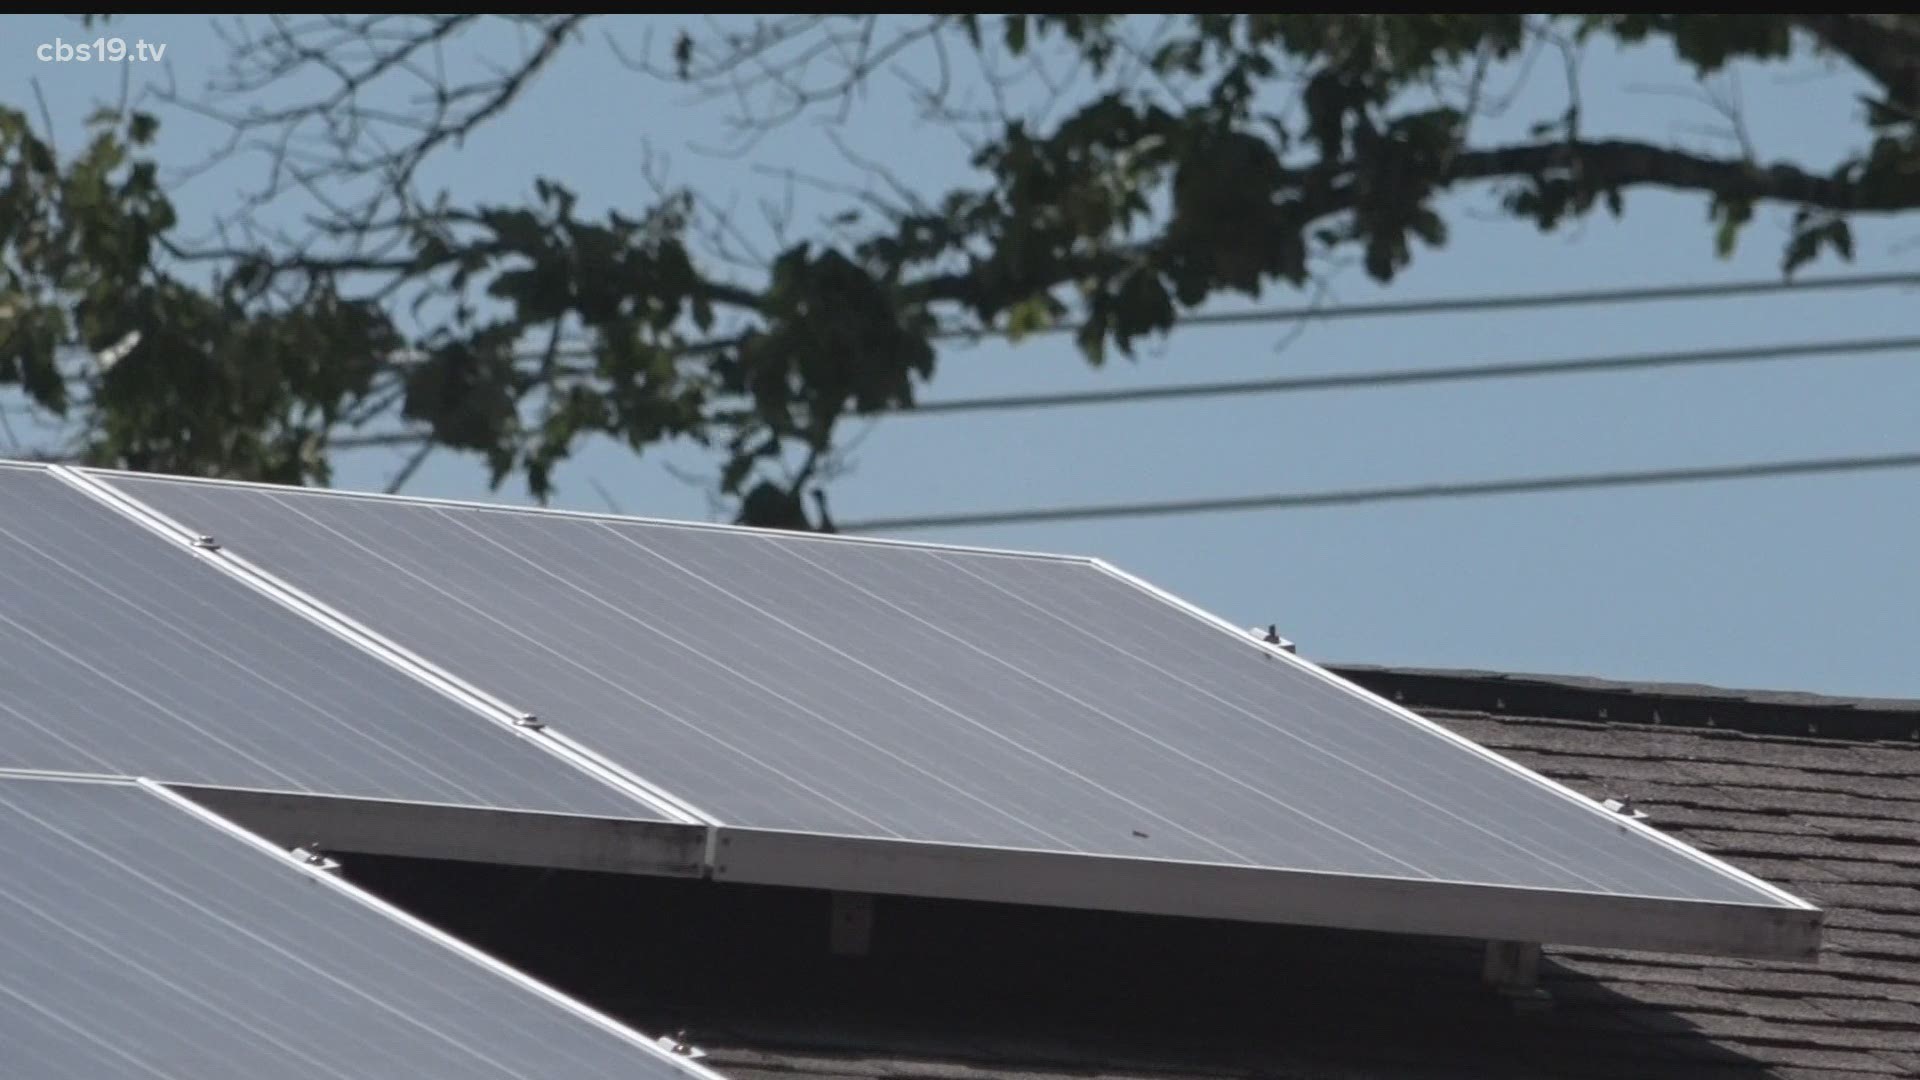 A Tyler ordinance from 2012 says any solar panels on a home cannot be visible from public streets.